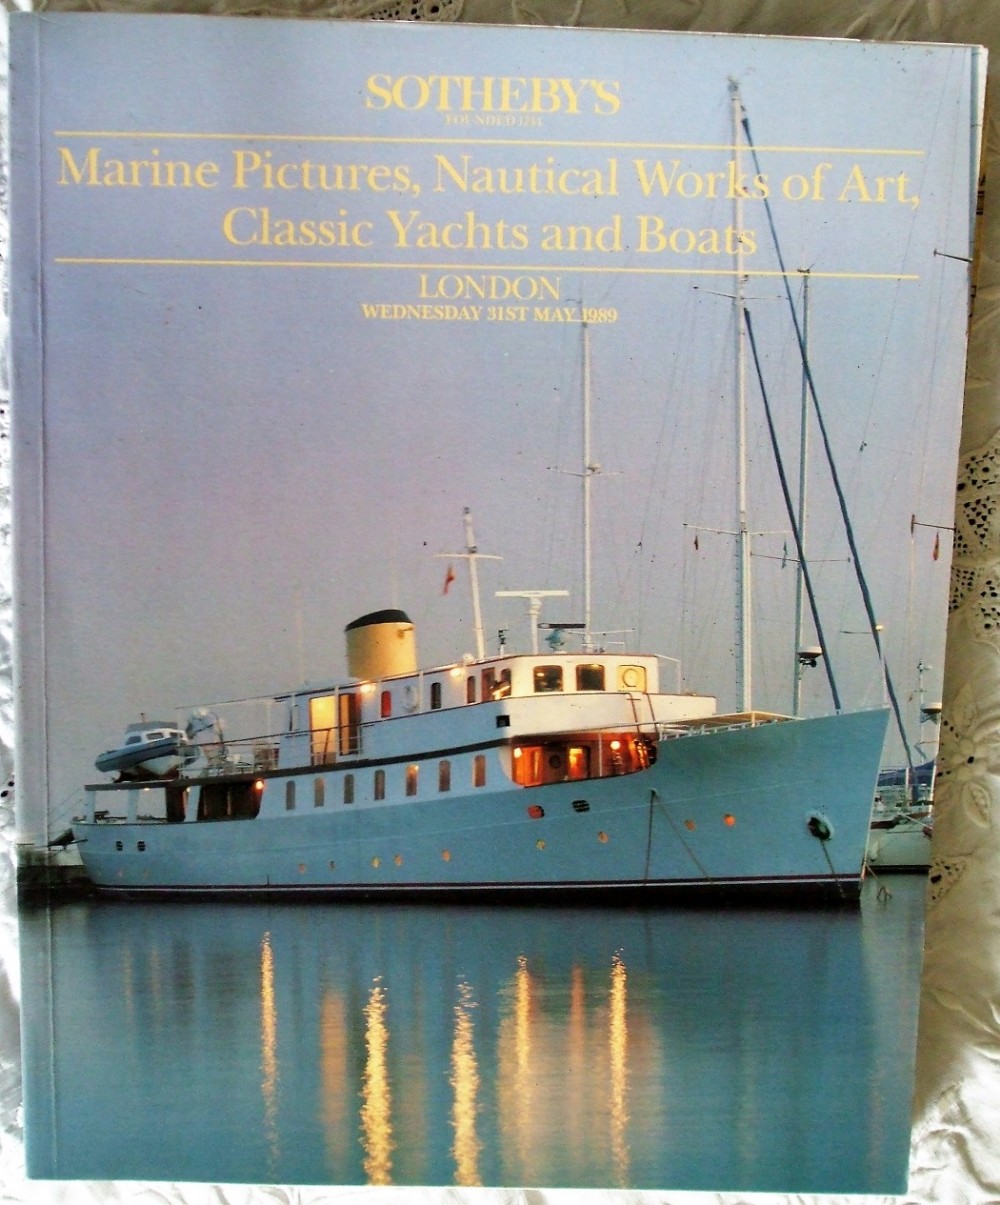 sotheby's marine pictures nautical works of art classic yachts and boats london 31 05 1989